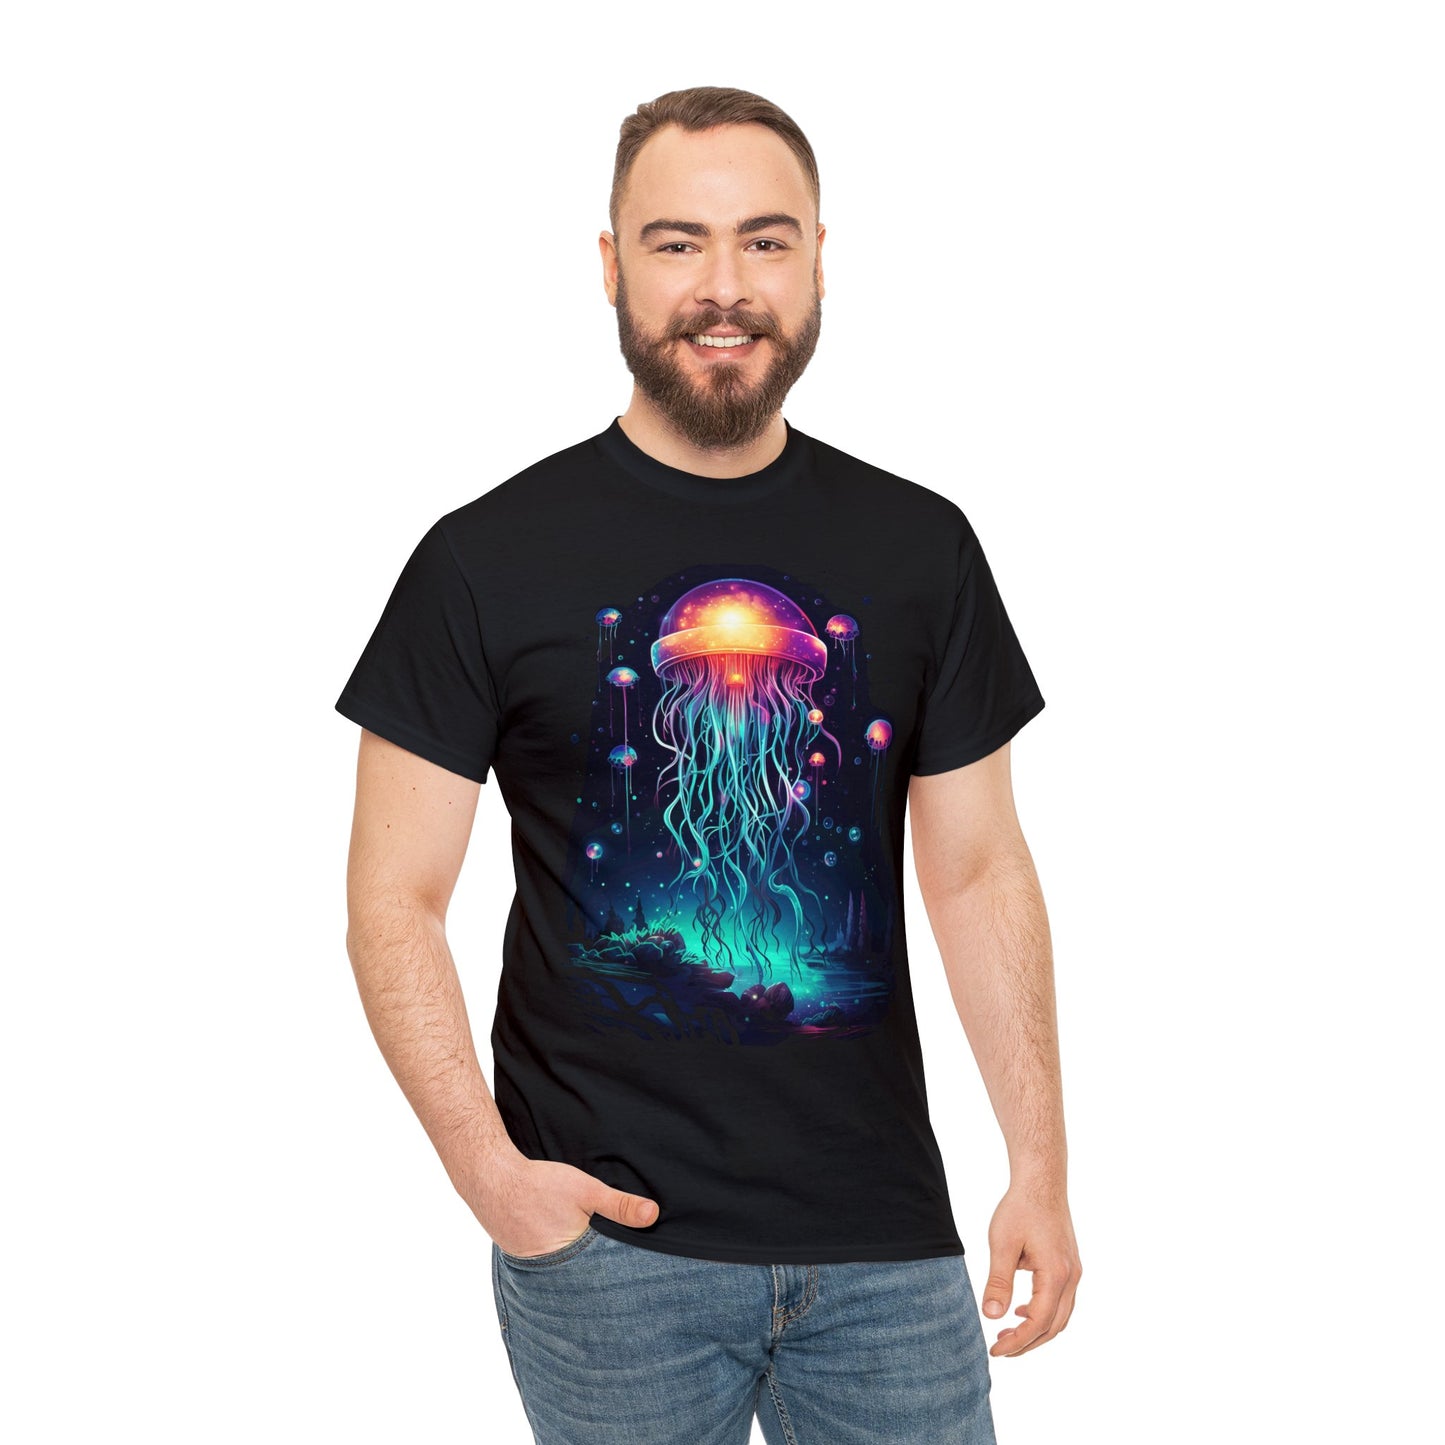 Trippy Space Jelly Fish Graphic Design Tee